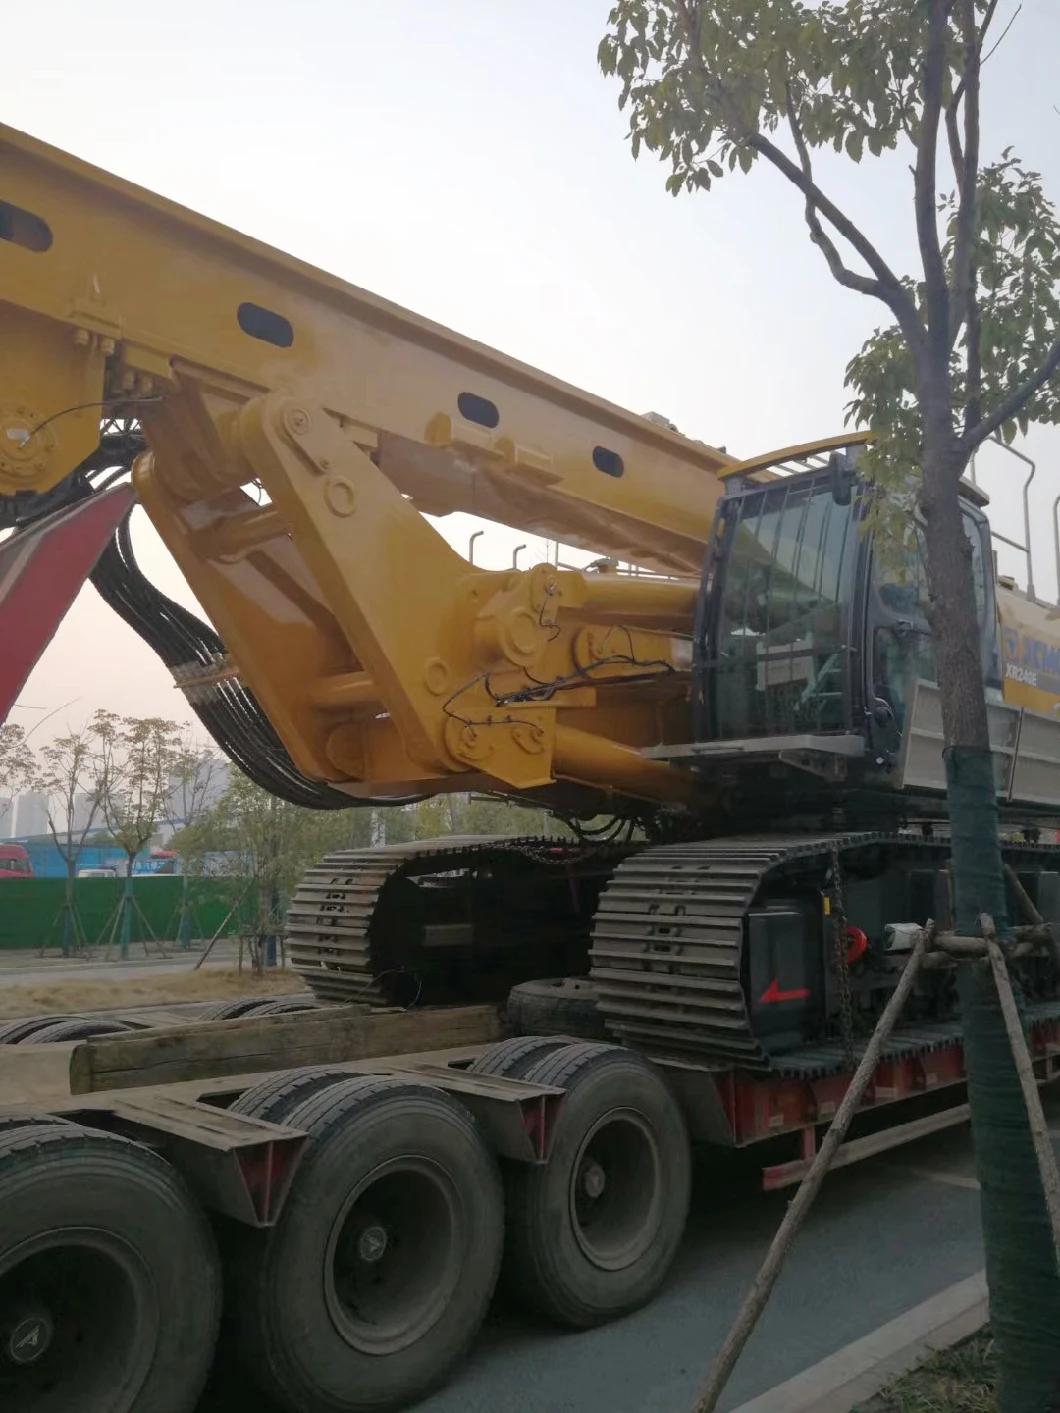 Civil Construction Hydraulic Power Rotary Pile Drilling Machine Xrs1050